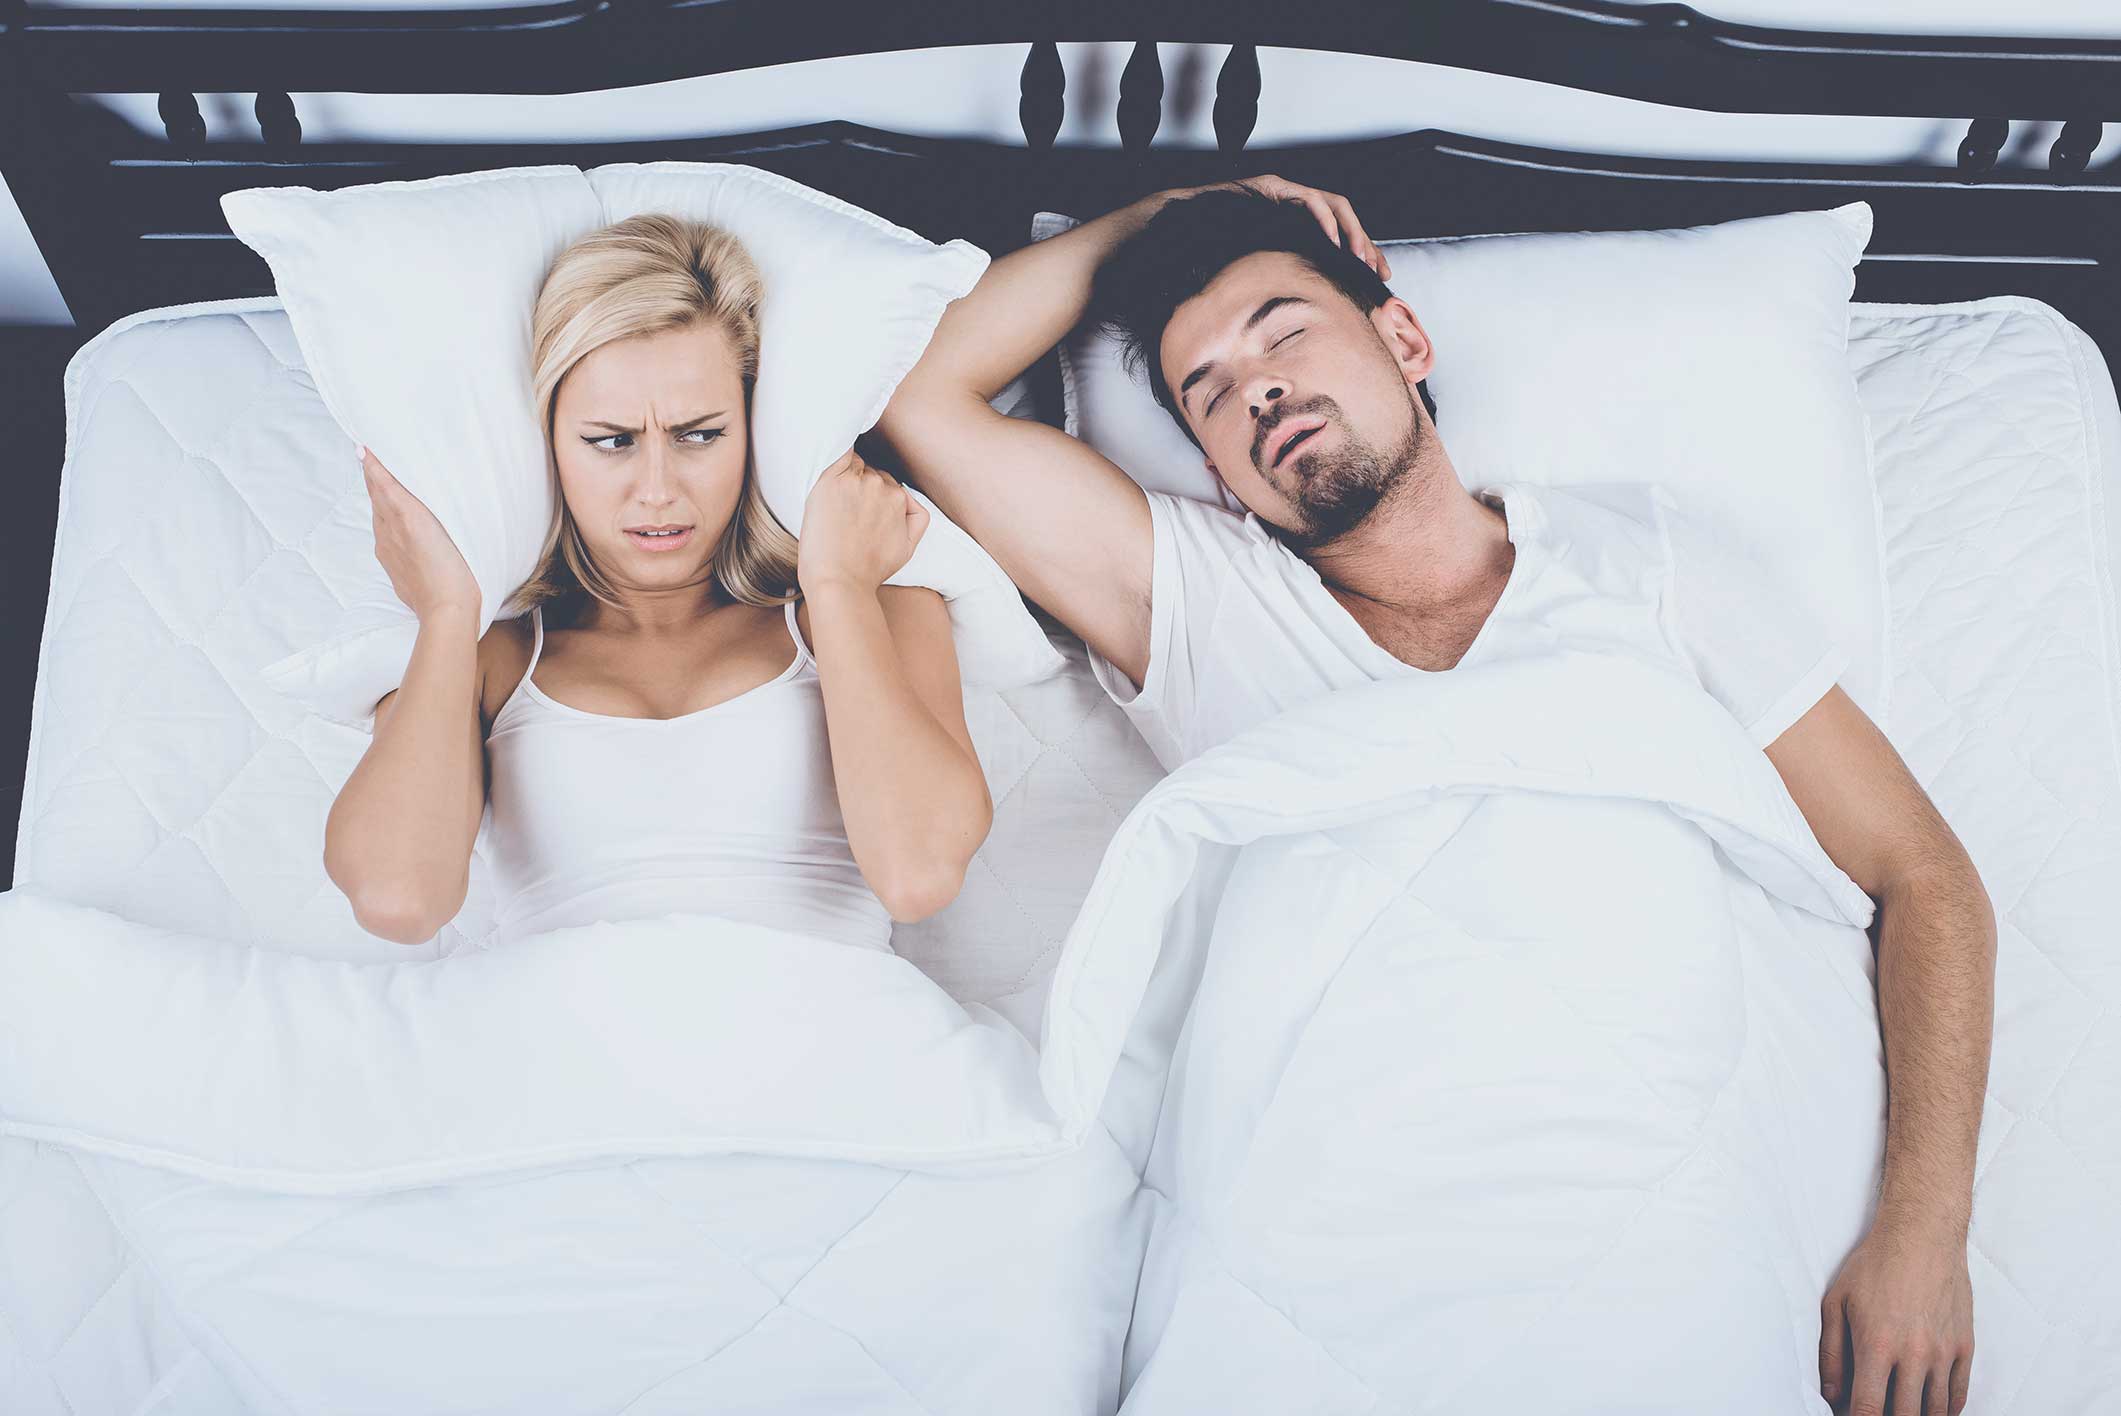 Woman struggling to sleep because of her husband's snoring